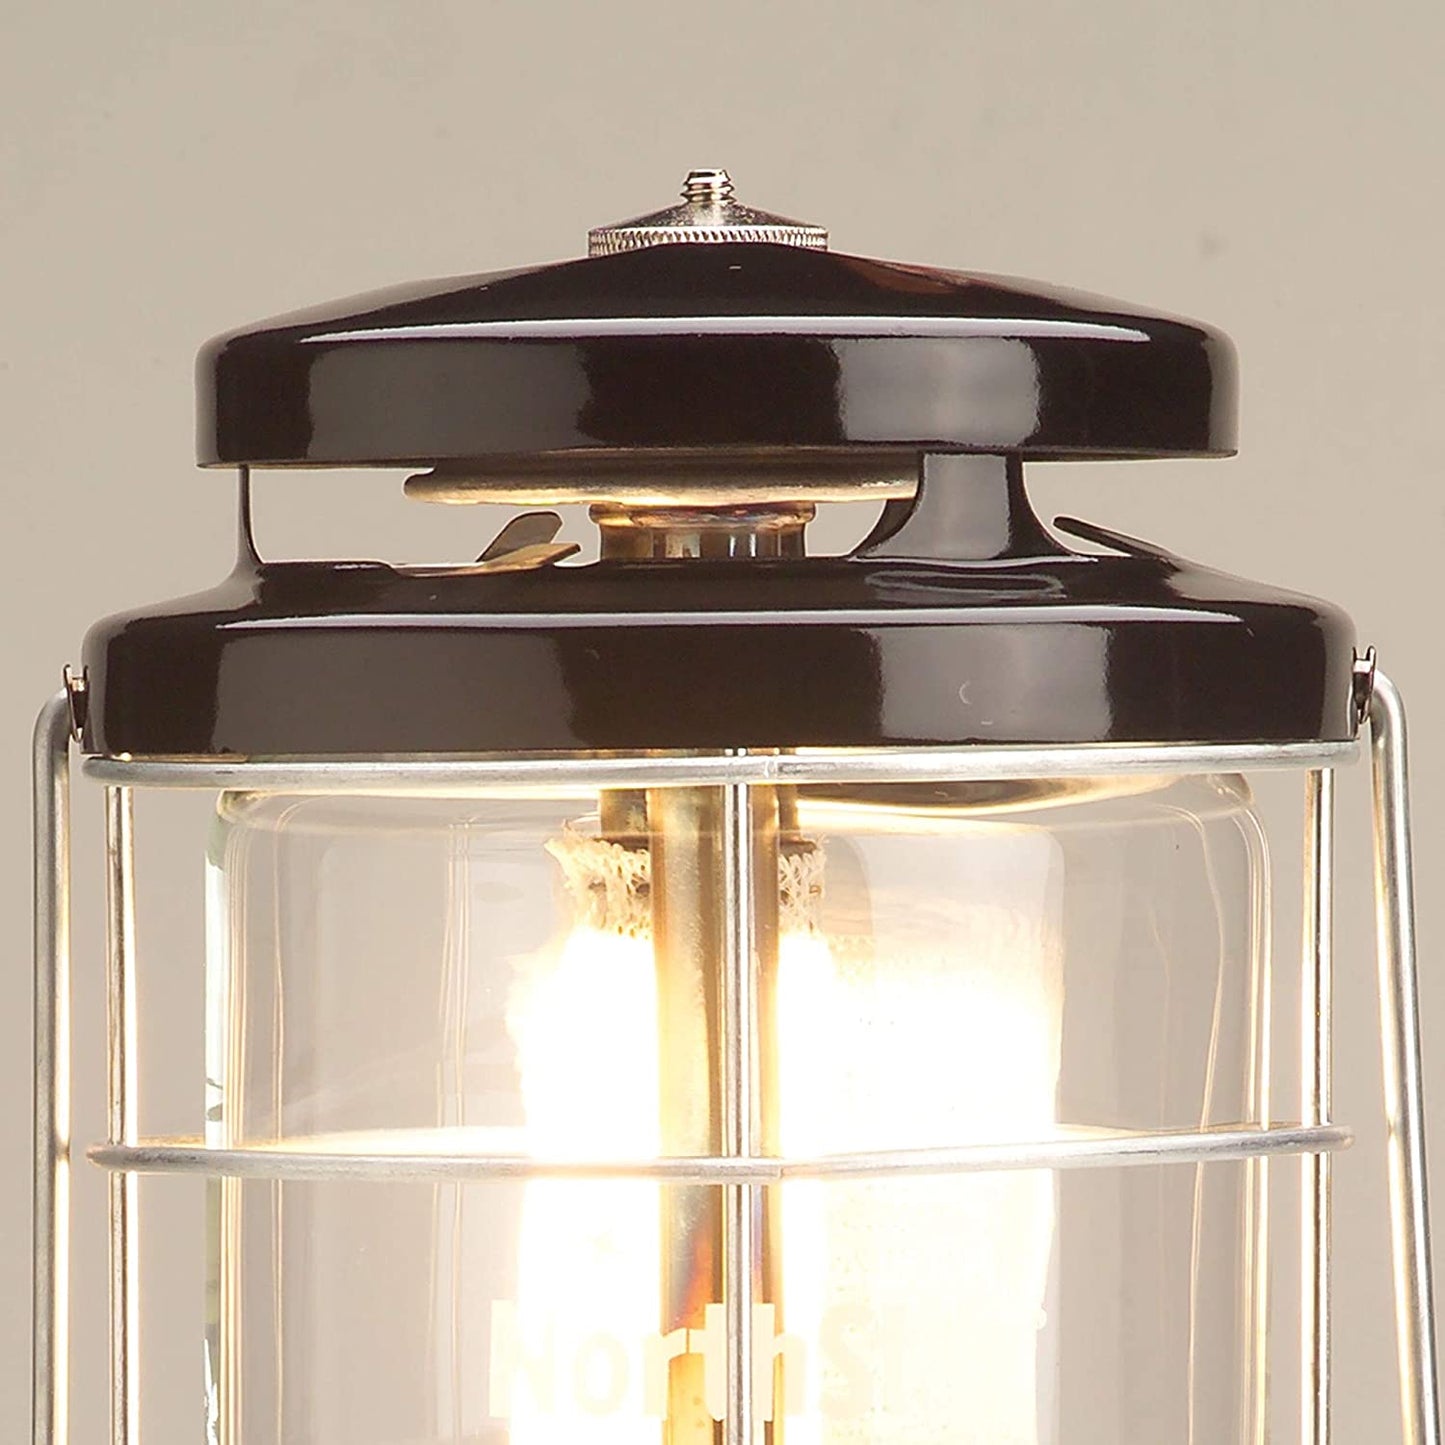 Lantern PPN Northstar EI Big Adventure Outfitters